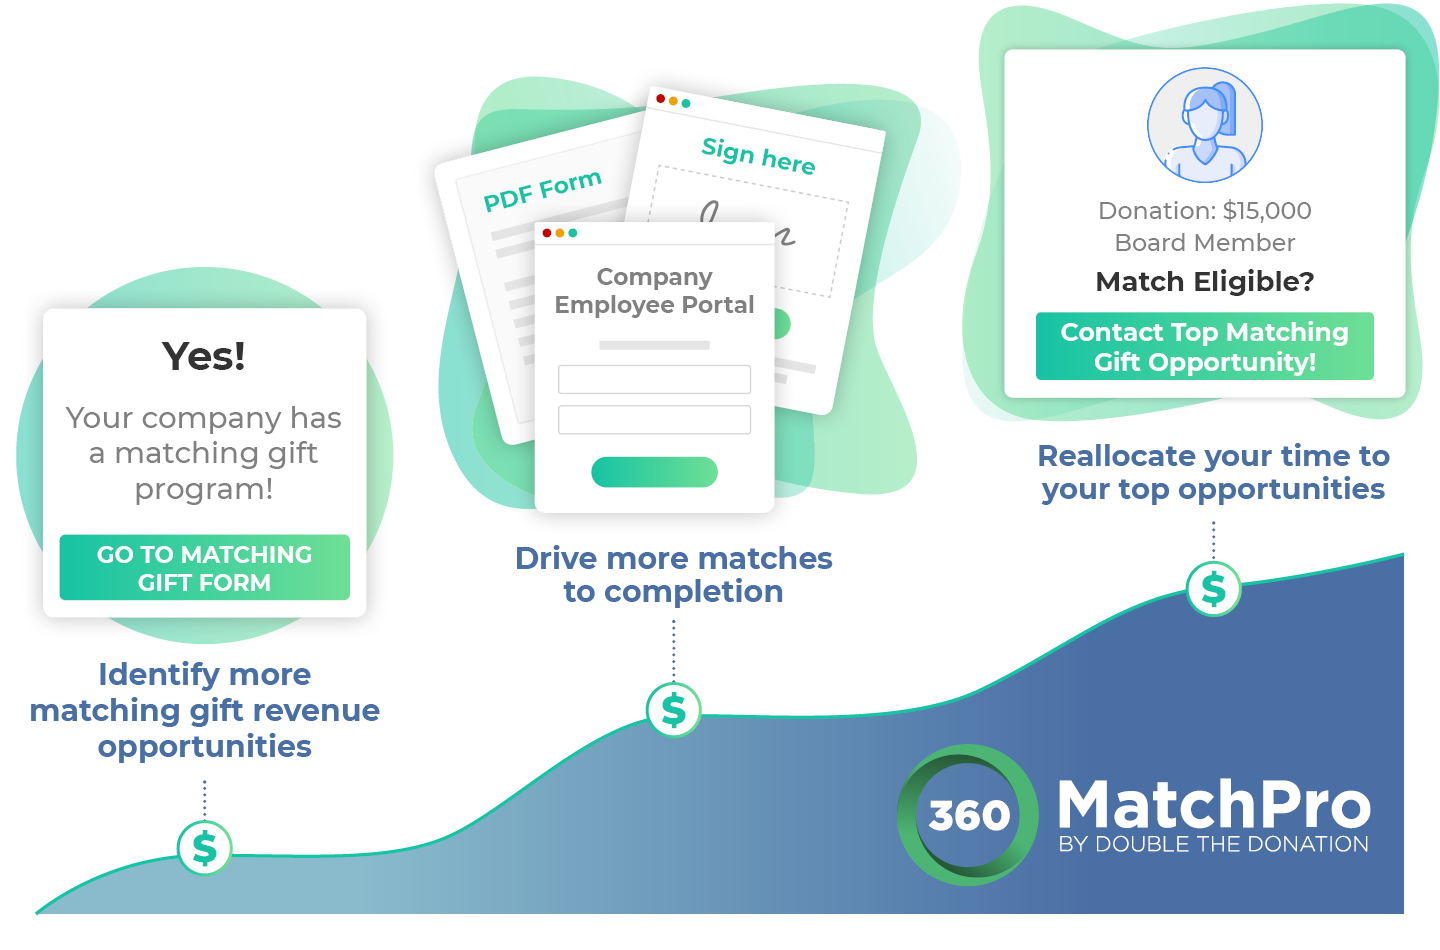 360MatchPro can change your fundraising strategy for the better